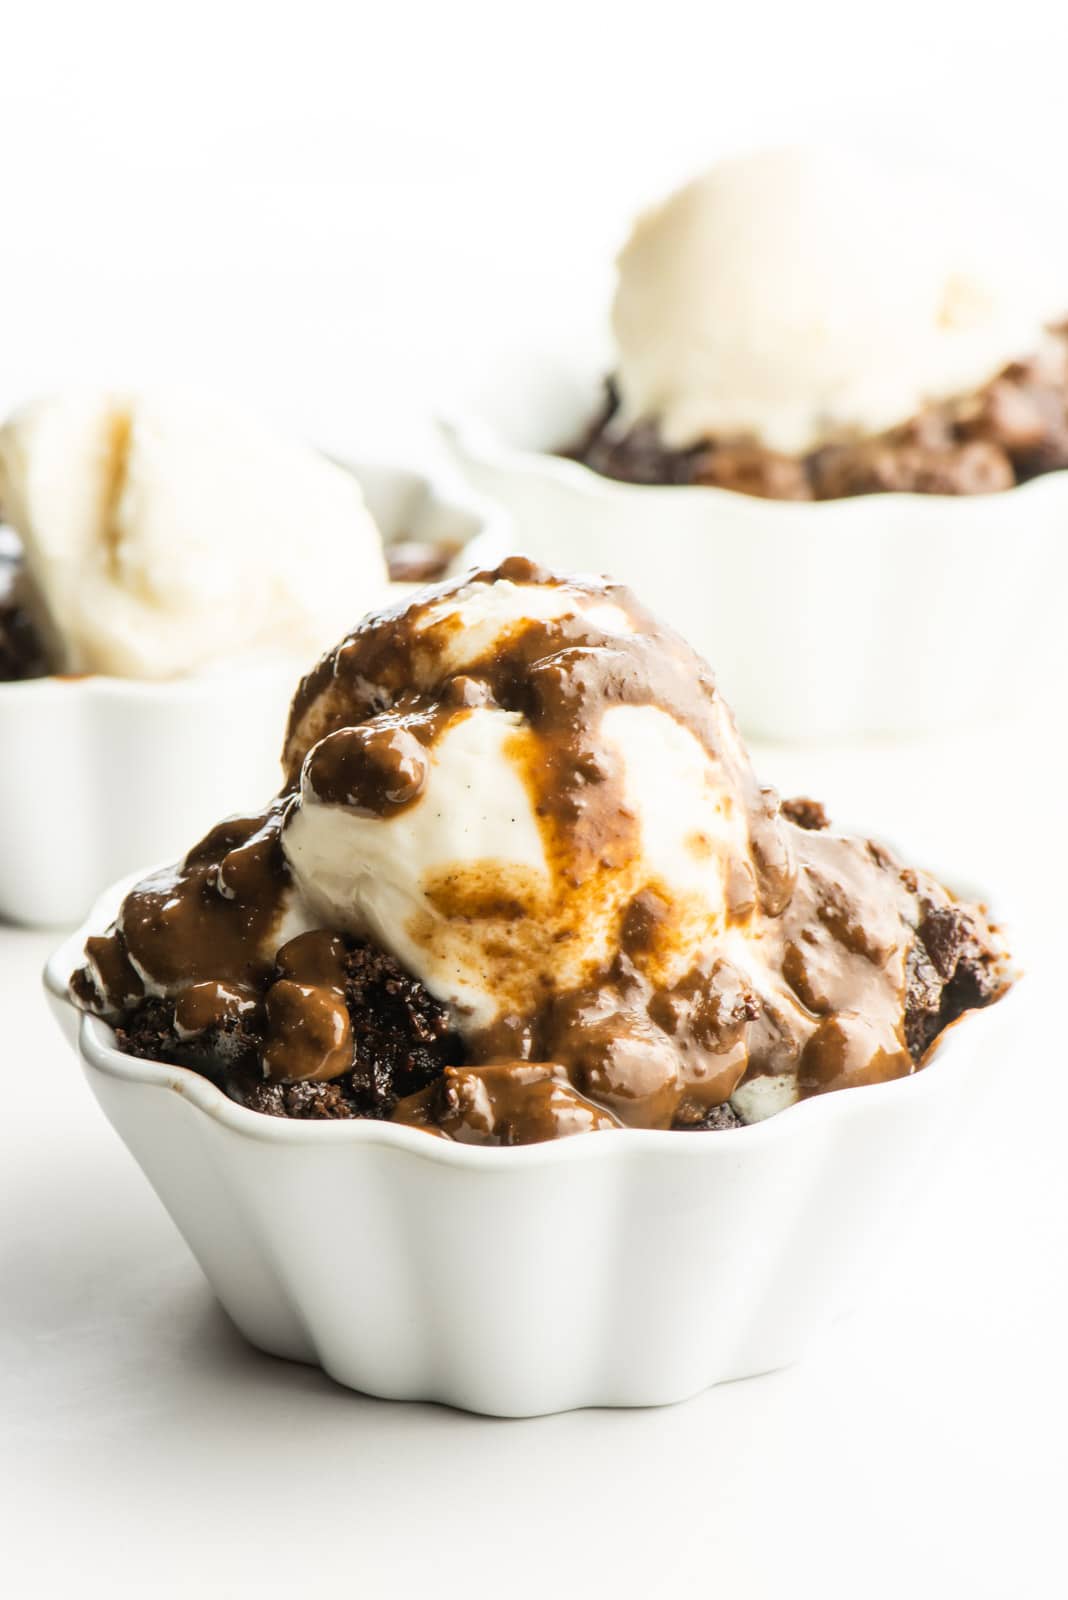 Three dessert bowls hold chocolate cake topped with ice cream. The main one has chocolate sauce over the top.